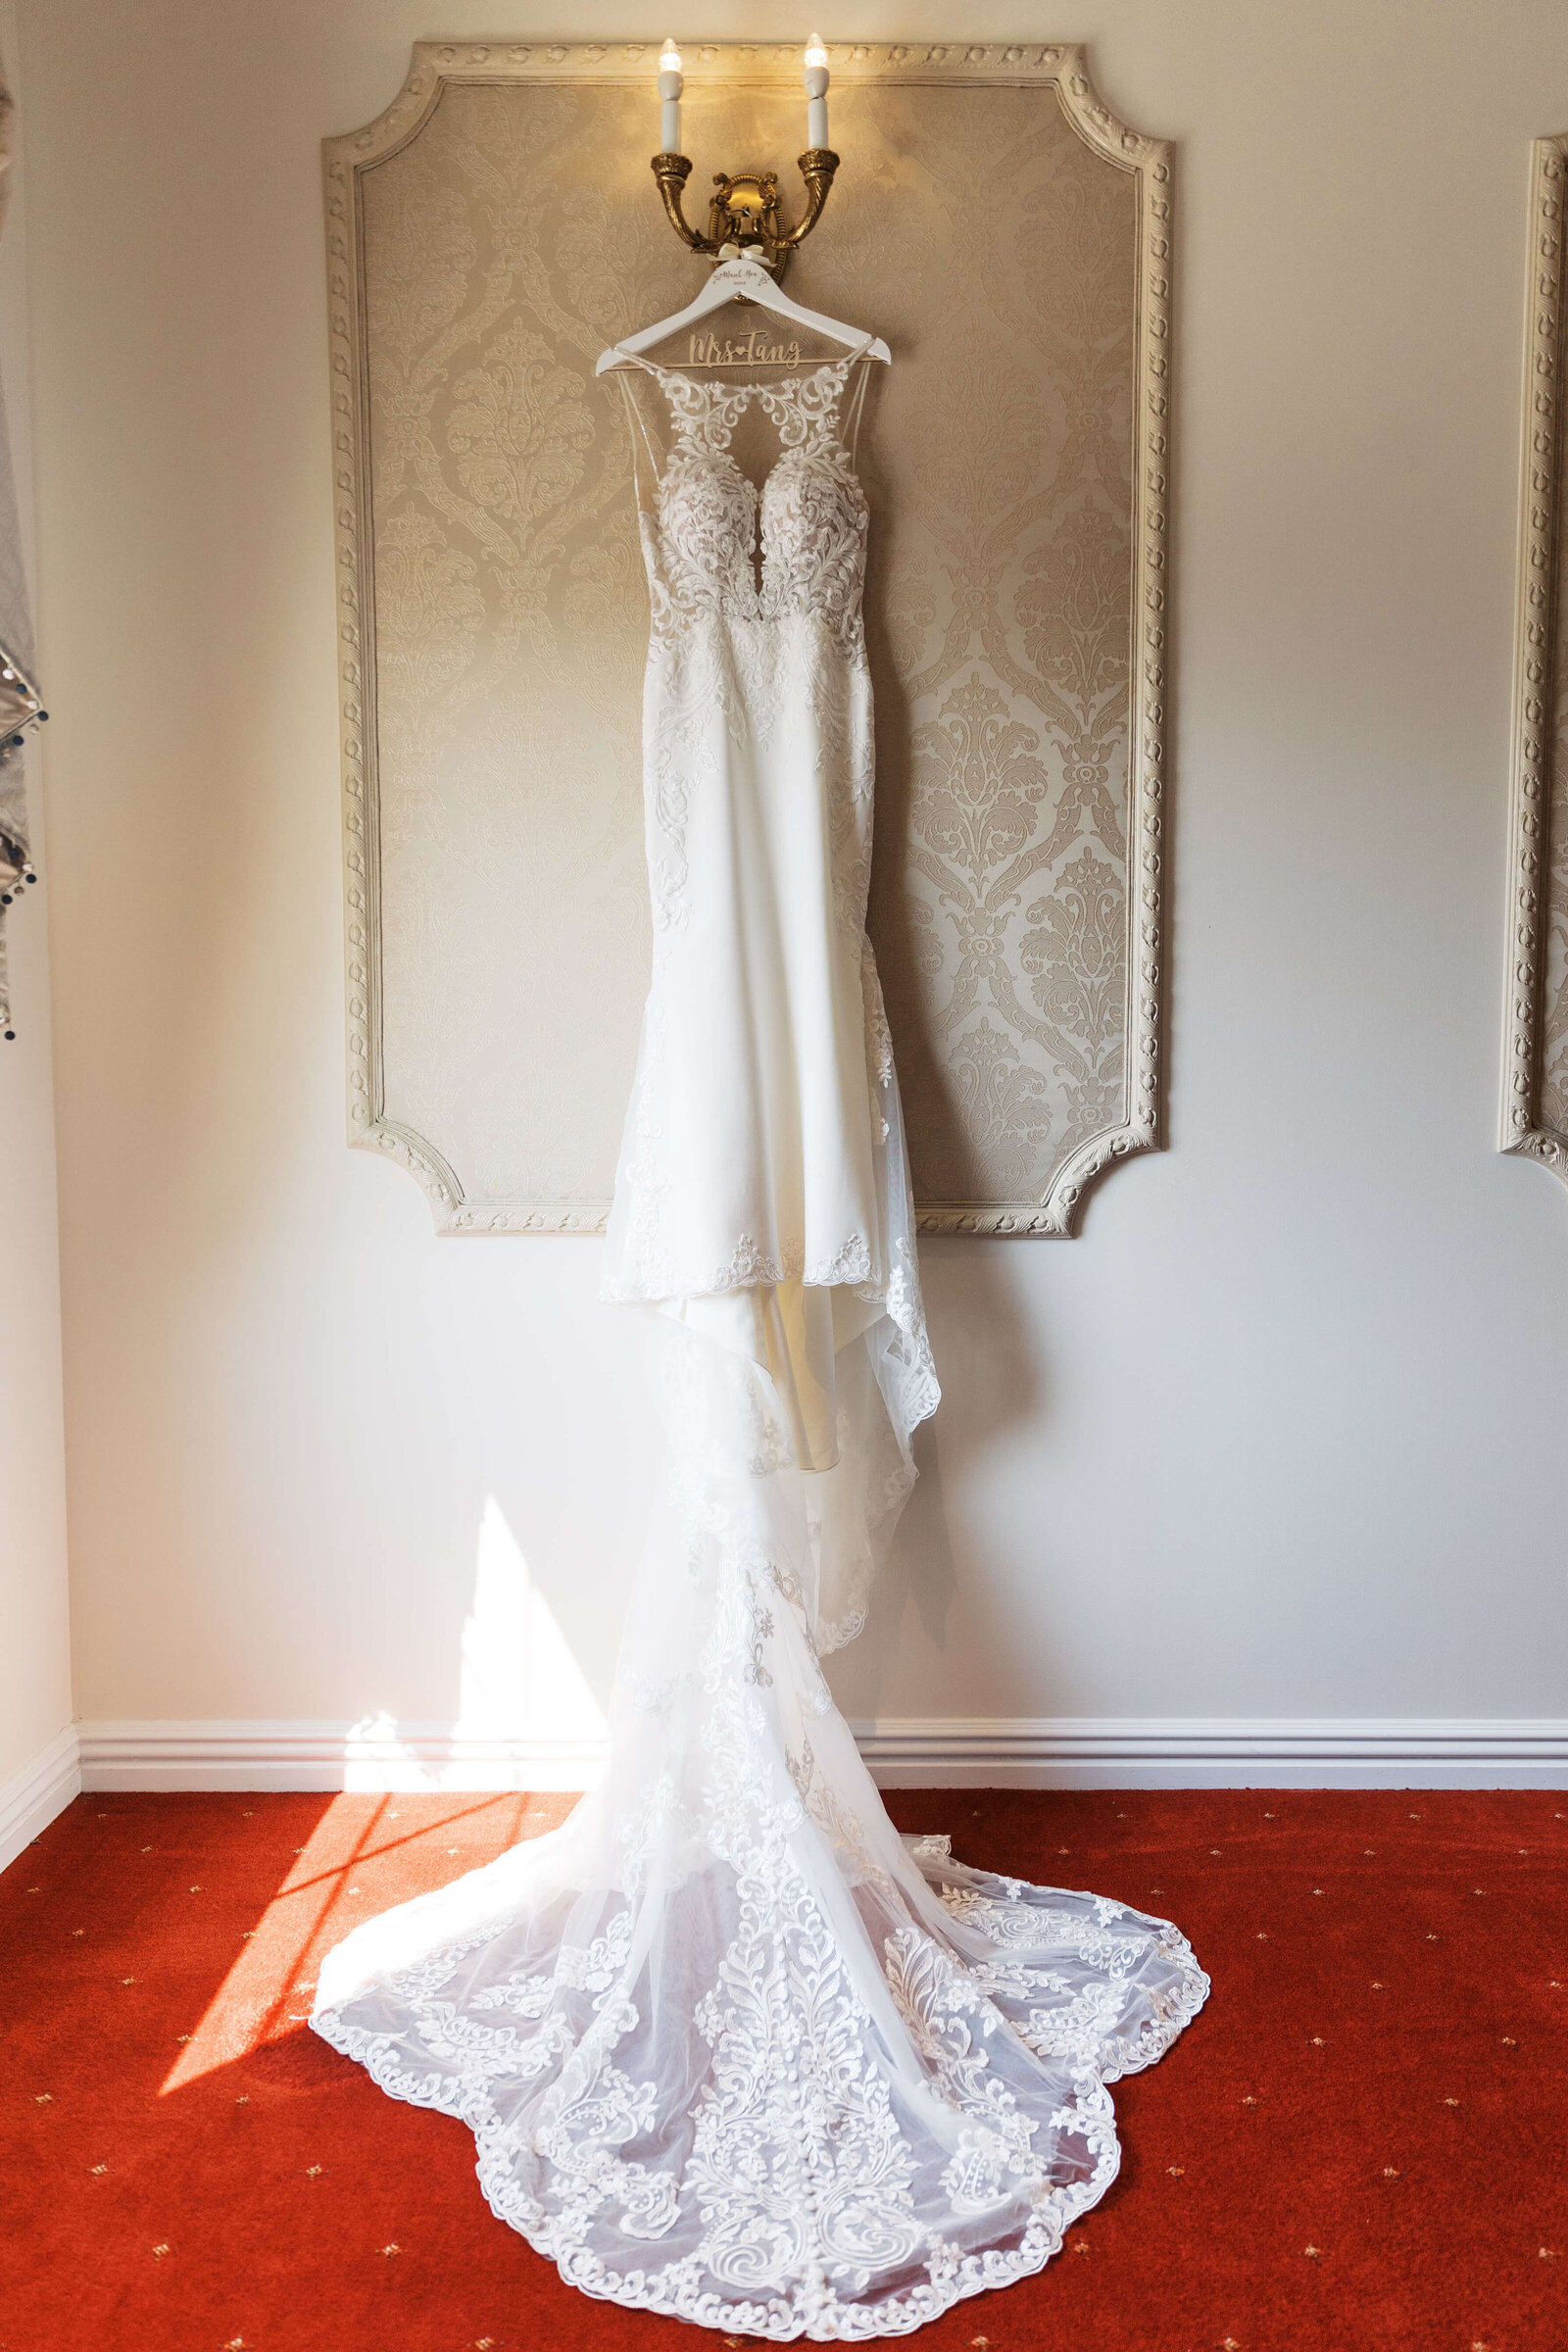 Bridal gown hanging in the stairway at Palace at Somerset Park.